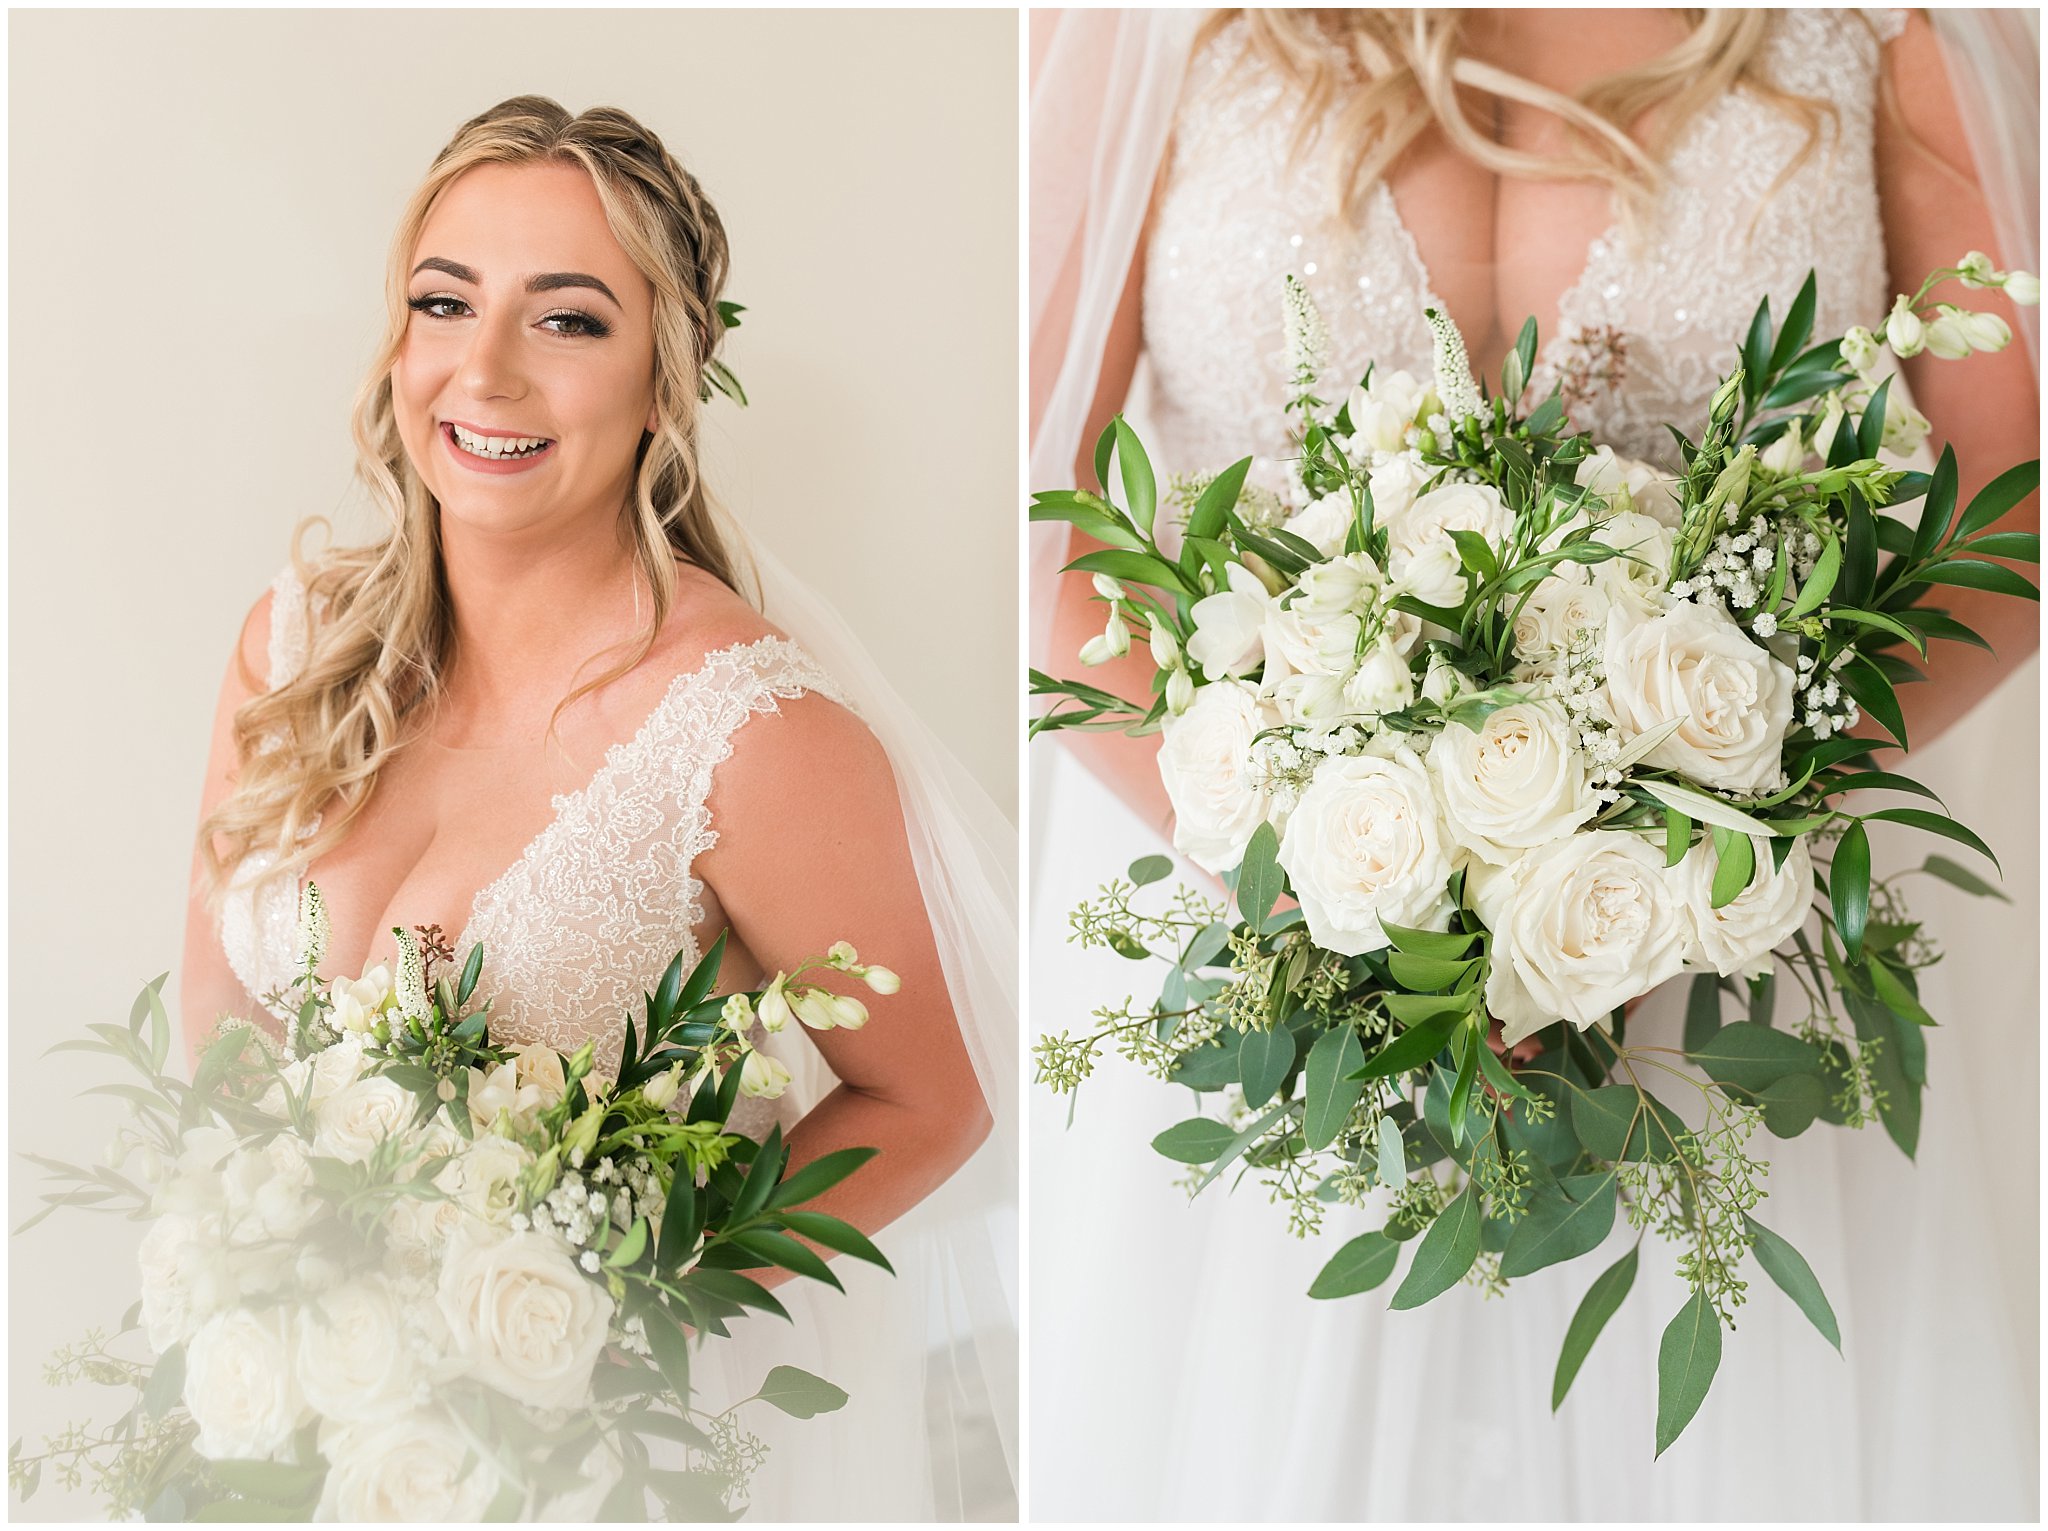 Champagne wedding dress with lace bride holding white floral bouquet | Sage Green and Gray Summer Wedding at Oak Hills | Jessie and Dallin Photography